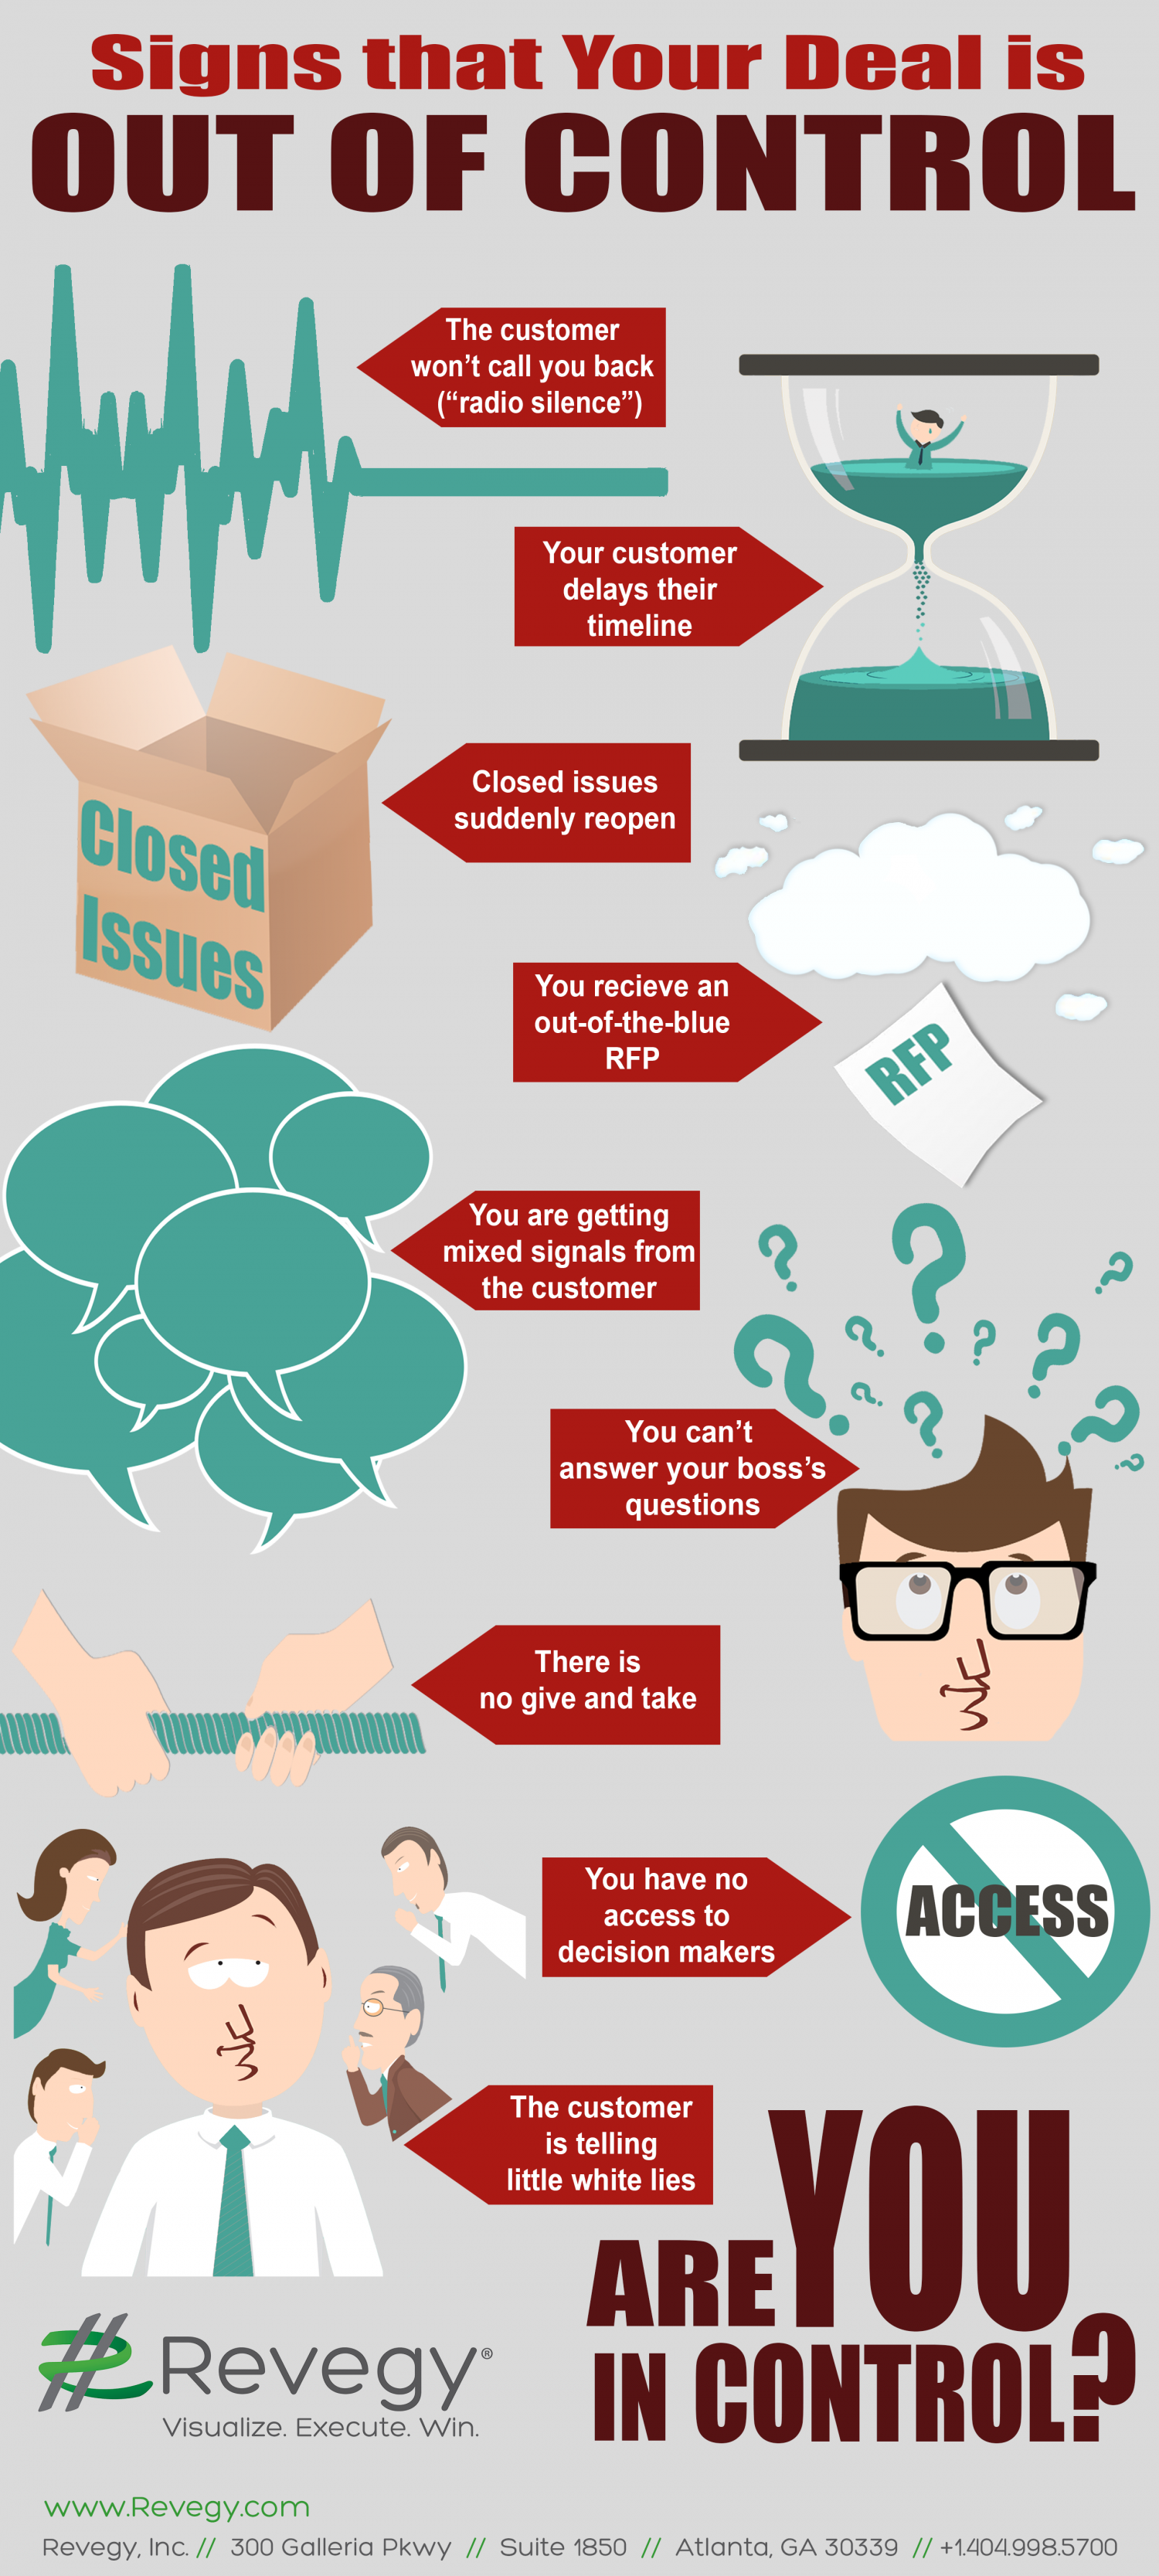 Signs that Your Deal is Out of Control Infographic